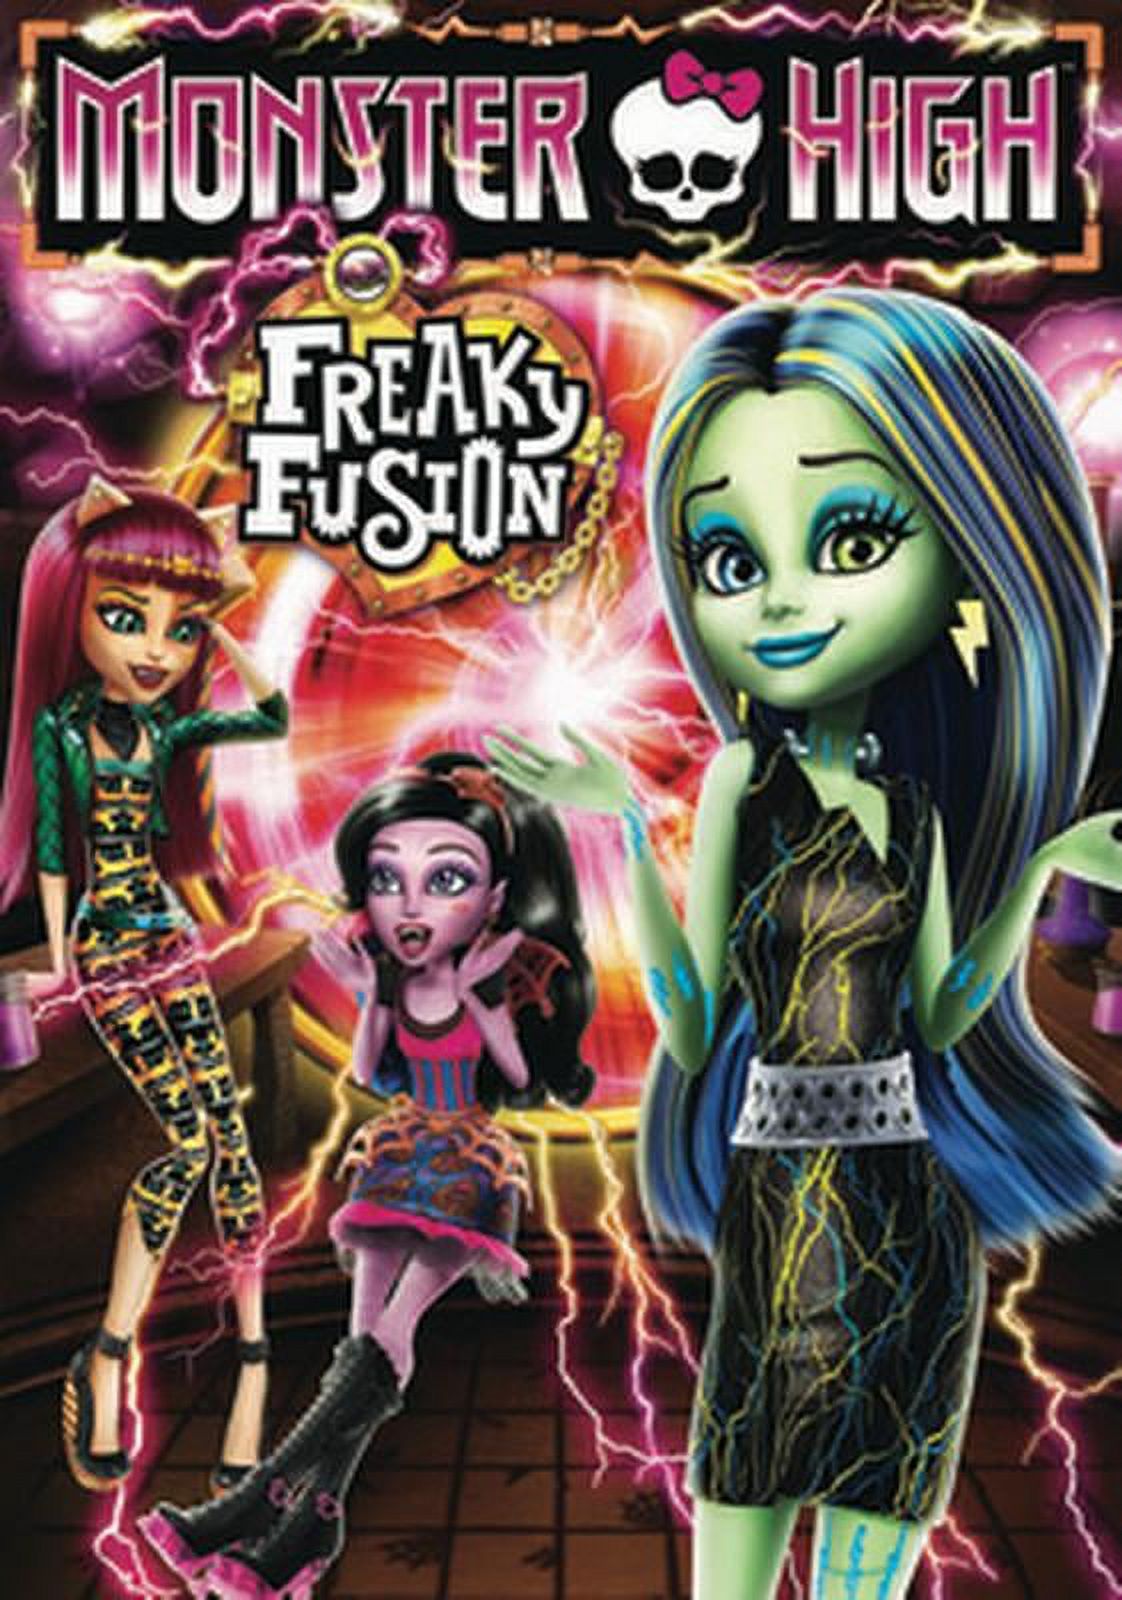 Monster High: Freaky Fusion (DVD) - image 1 of 3